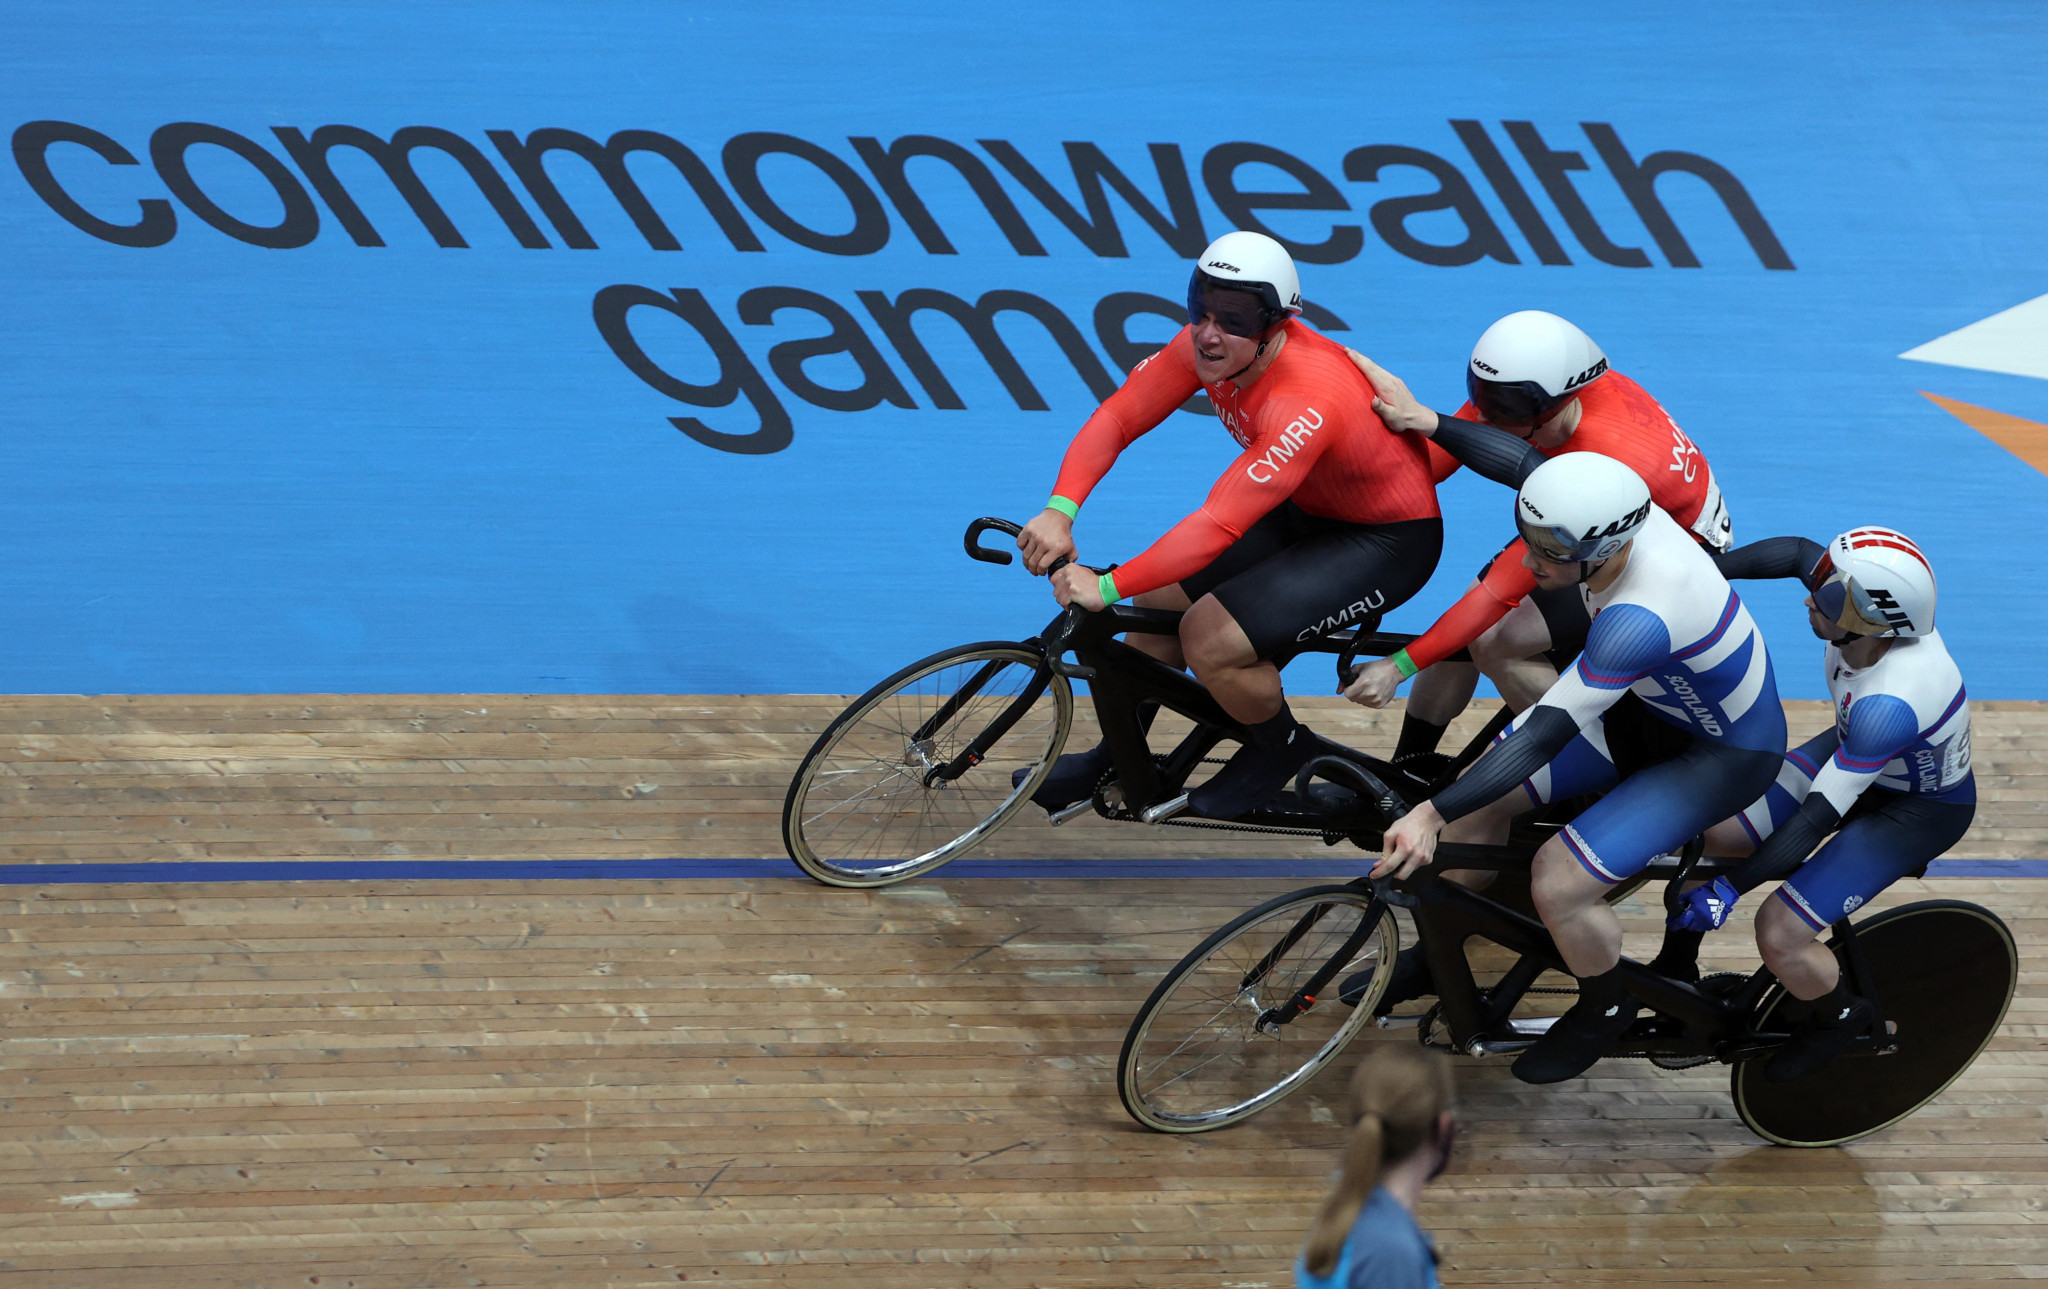 Fachie Commonwealth Games streak ended by Ball at day overshadowed by crash